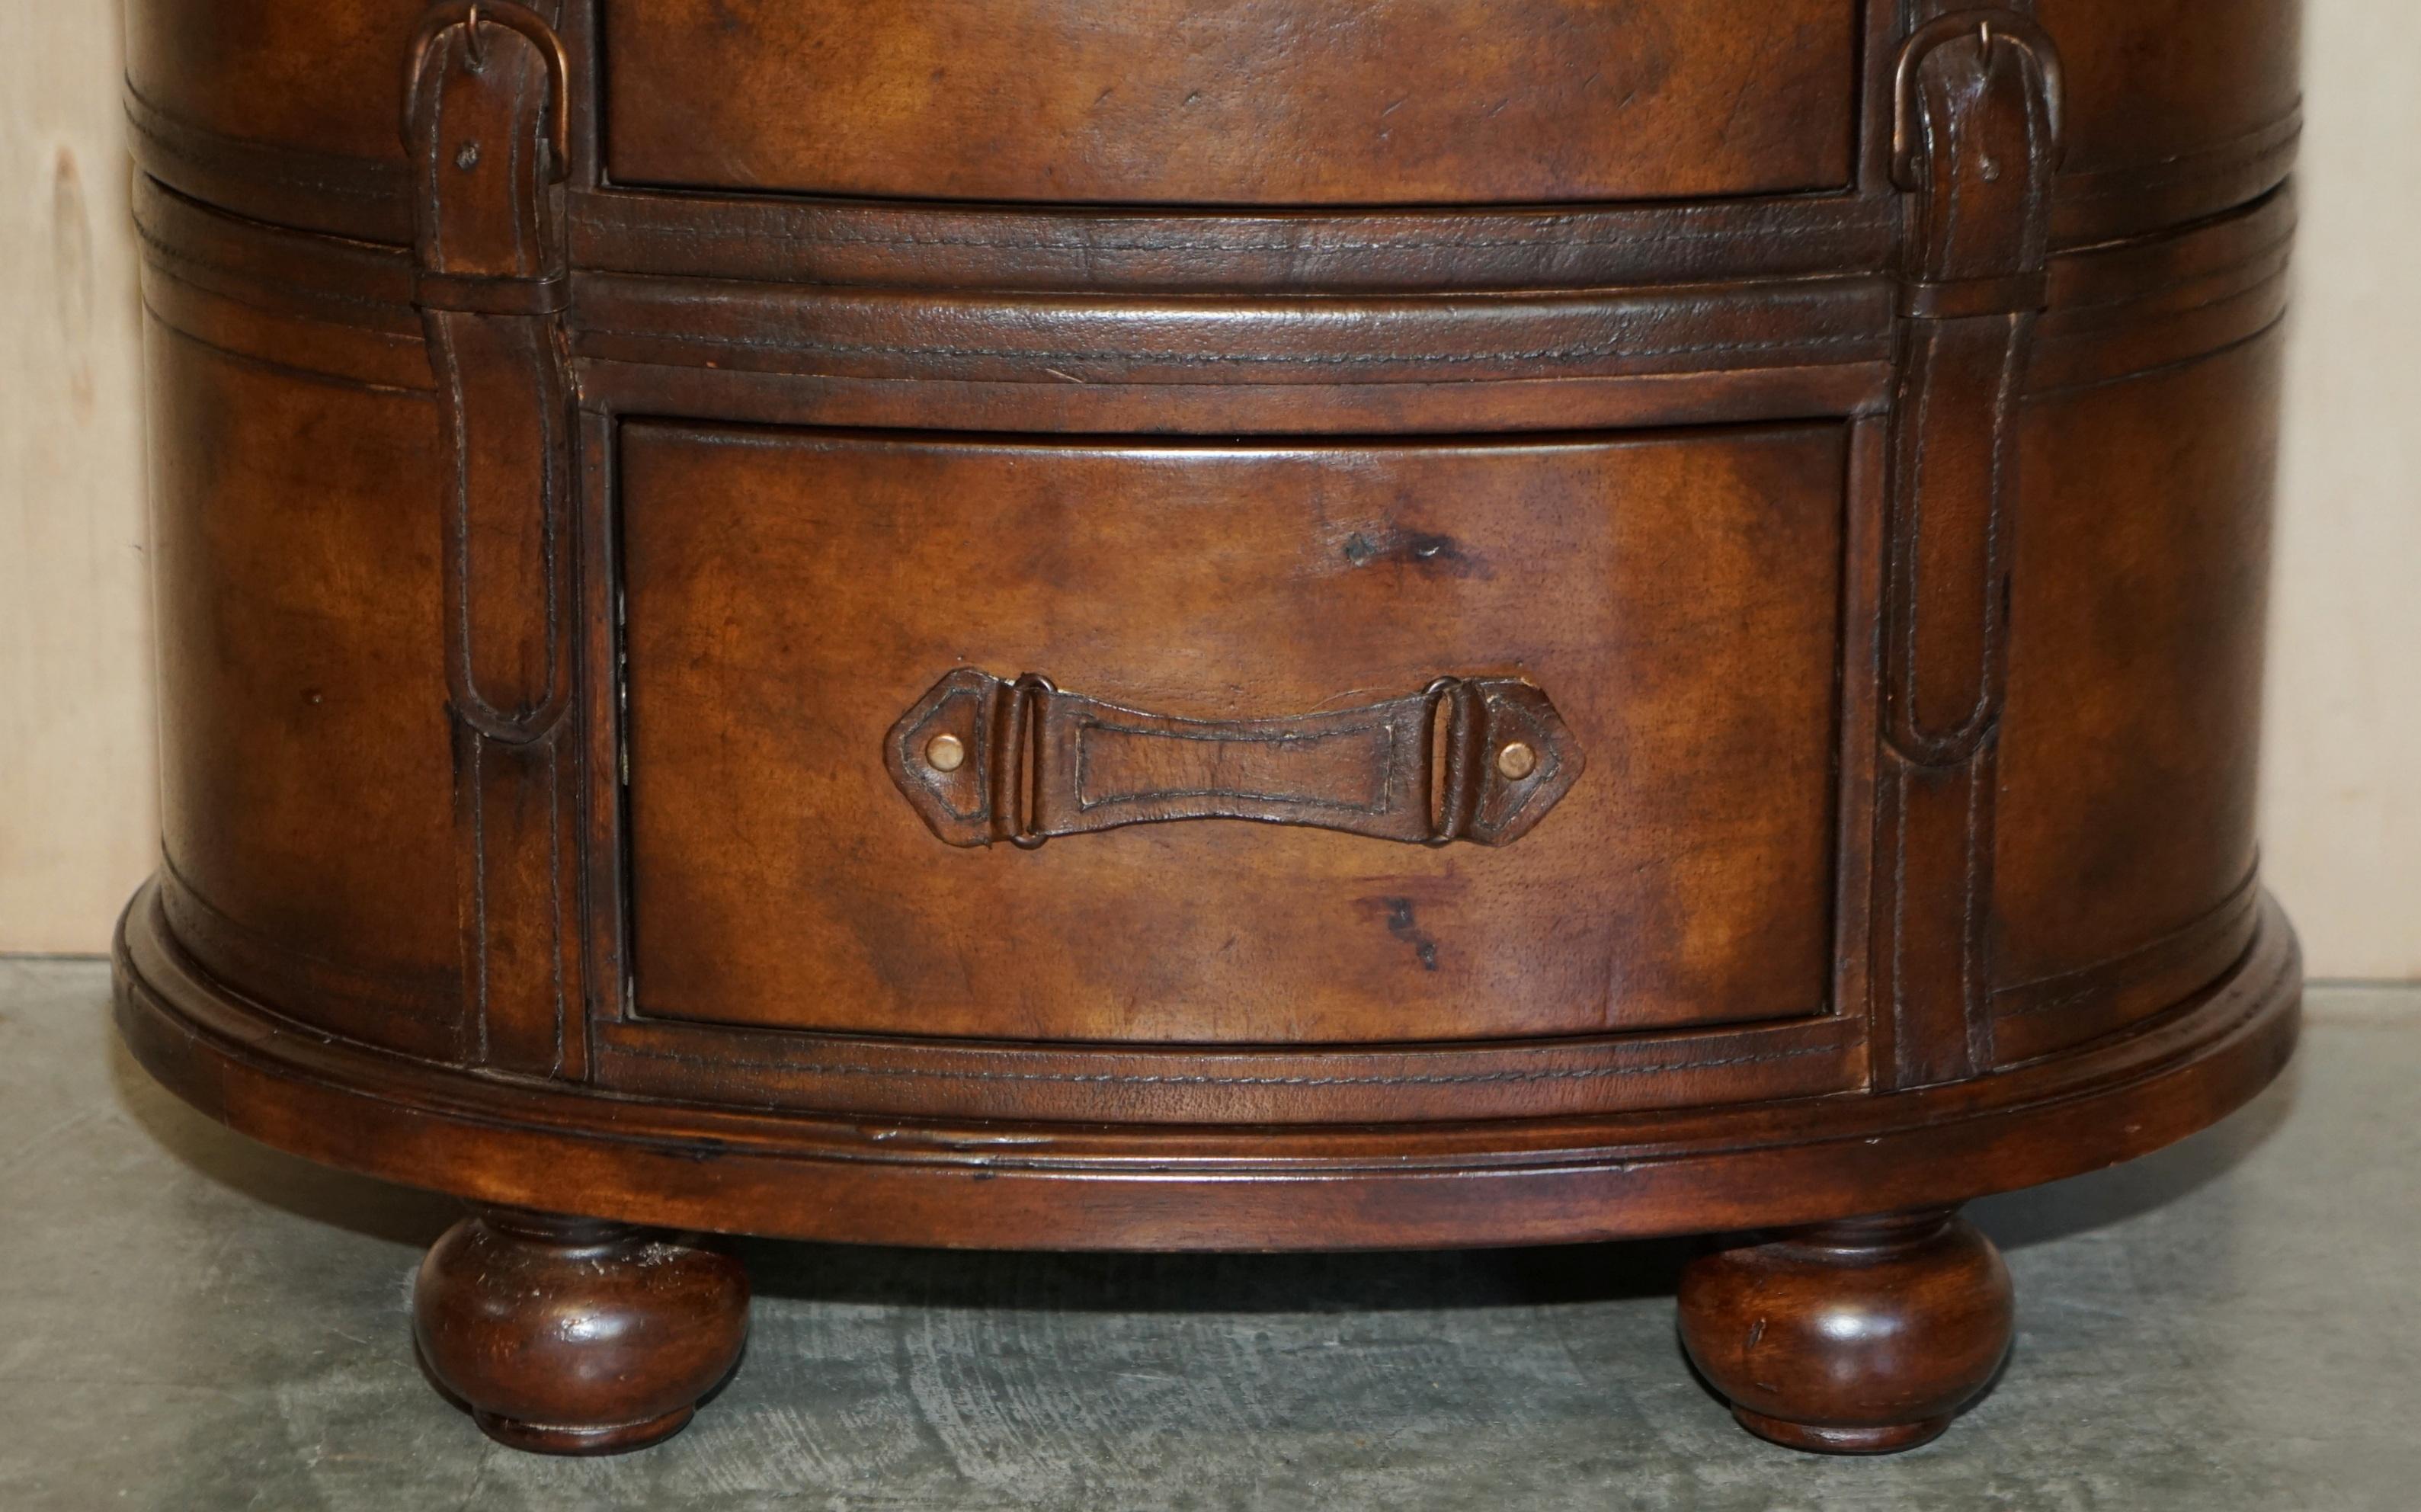 20th Century Brown Leather Oval Tallboy Chest of Drawers with Luggage Style Straps or Belts